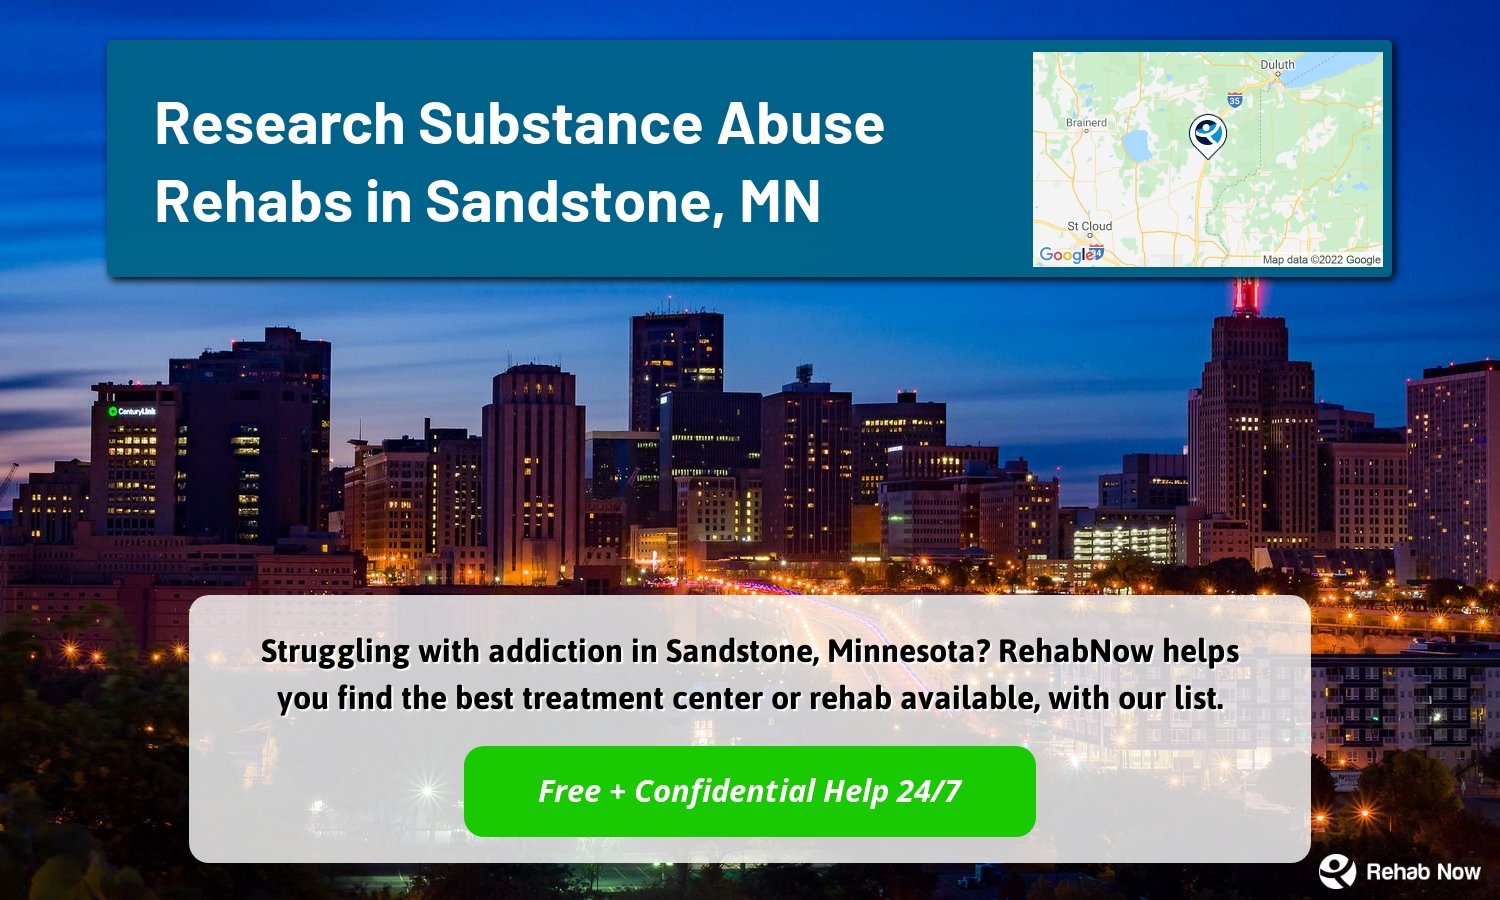 Struggling with addiction in Sandstone, Minnesota? RehabNow helps you find the best treatment center or rehab available, with our list.